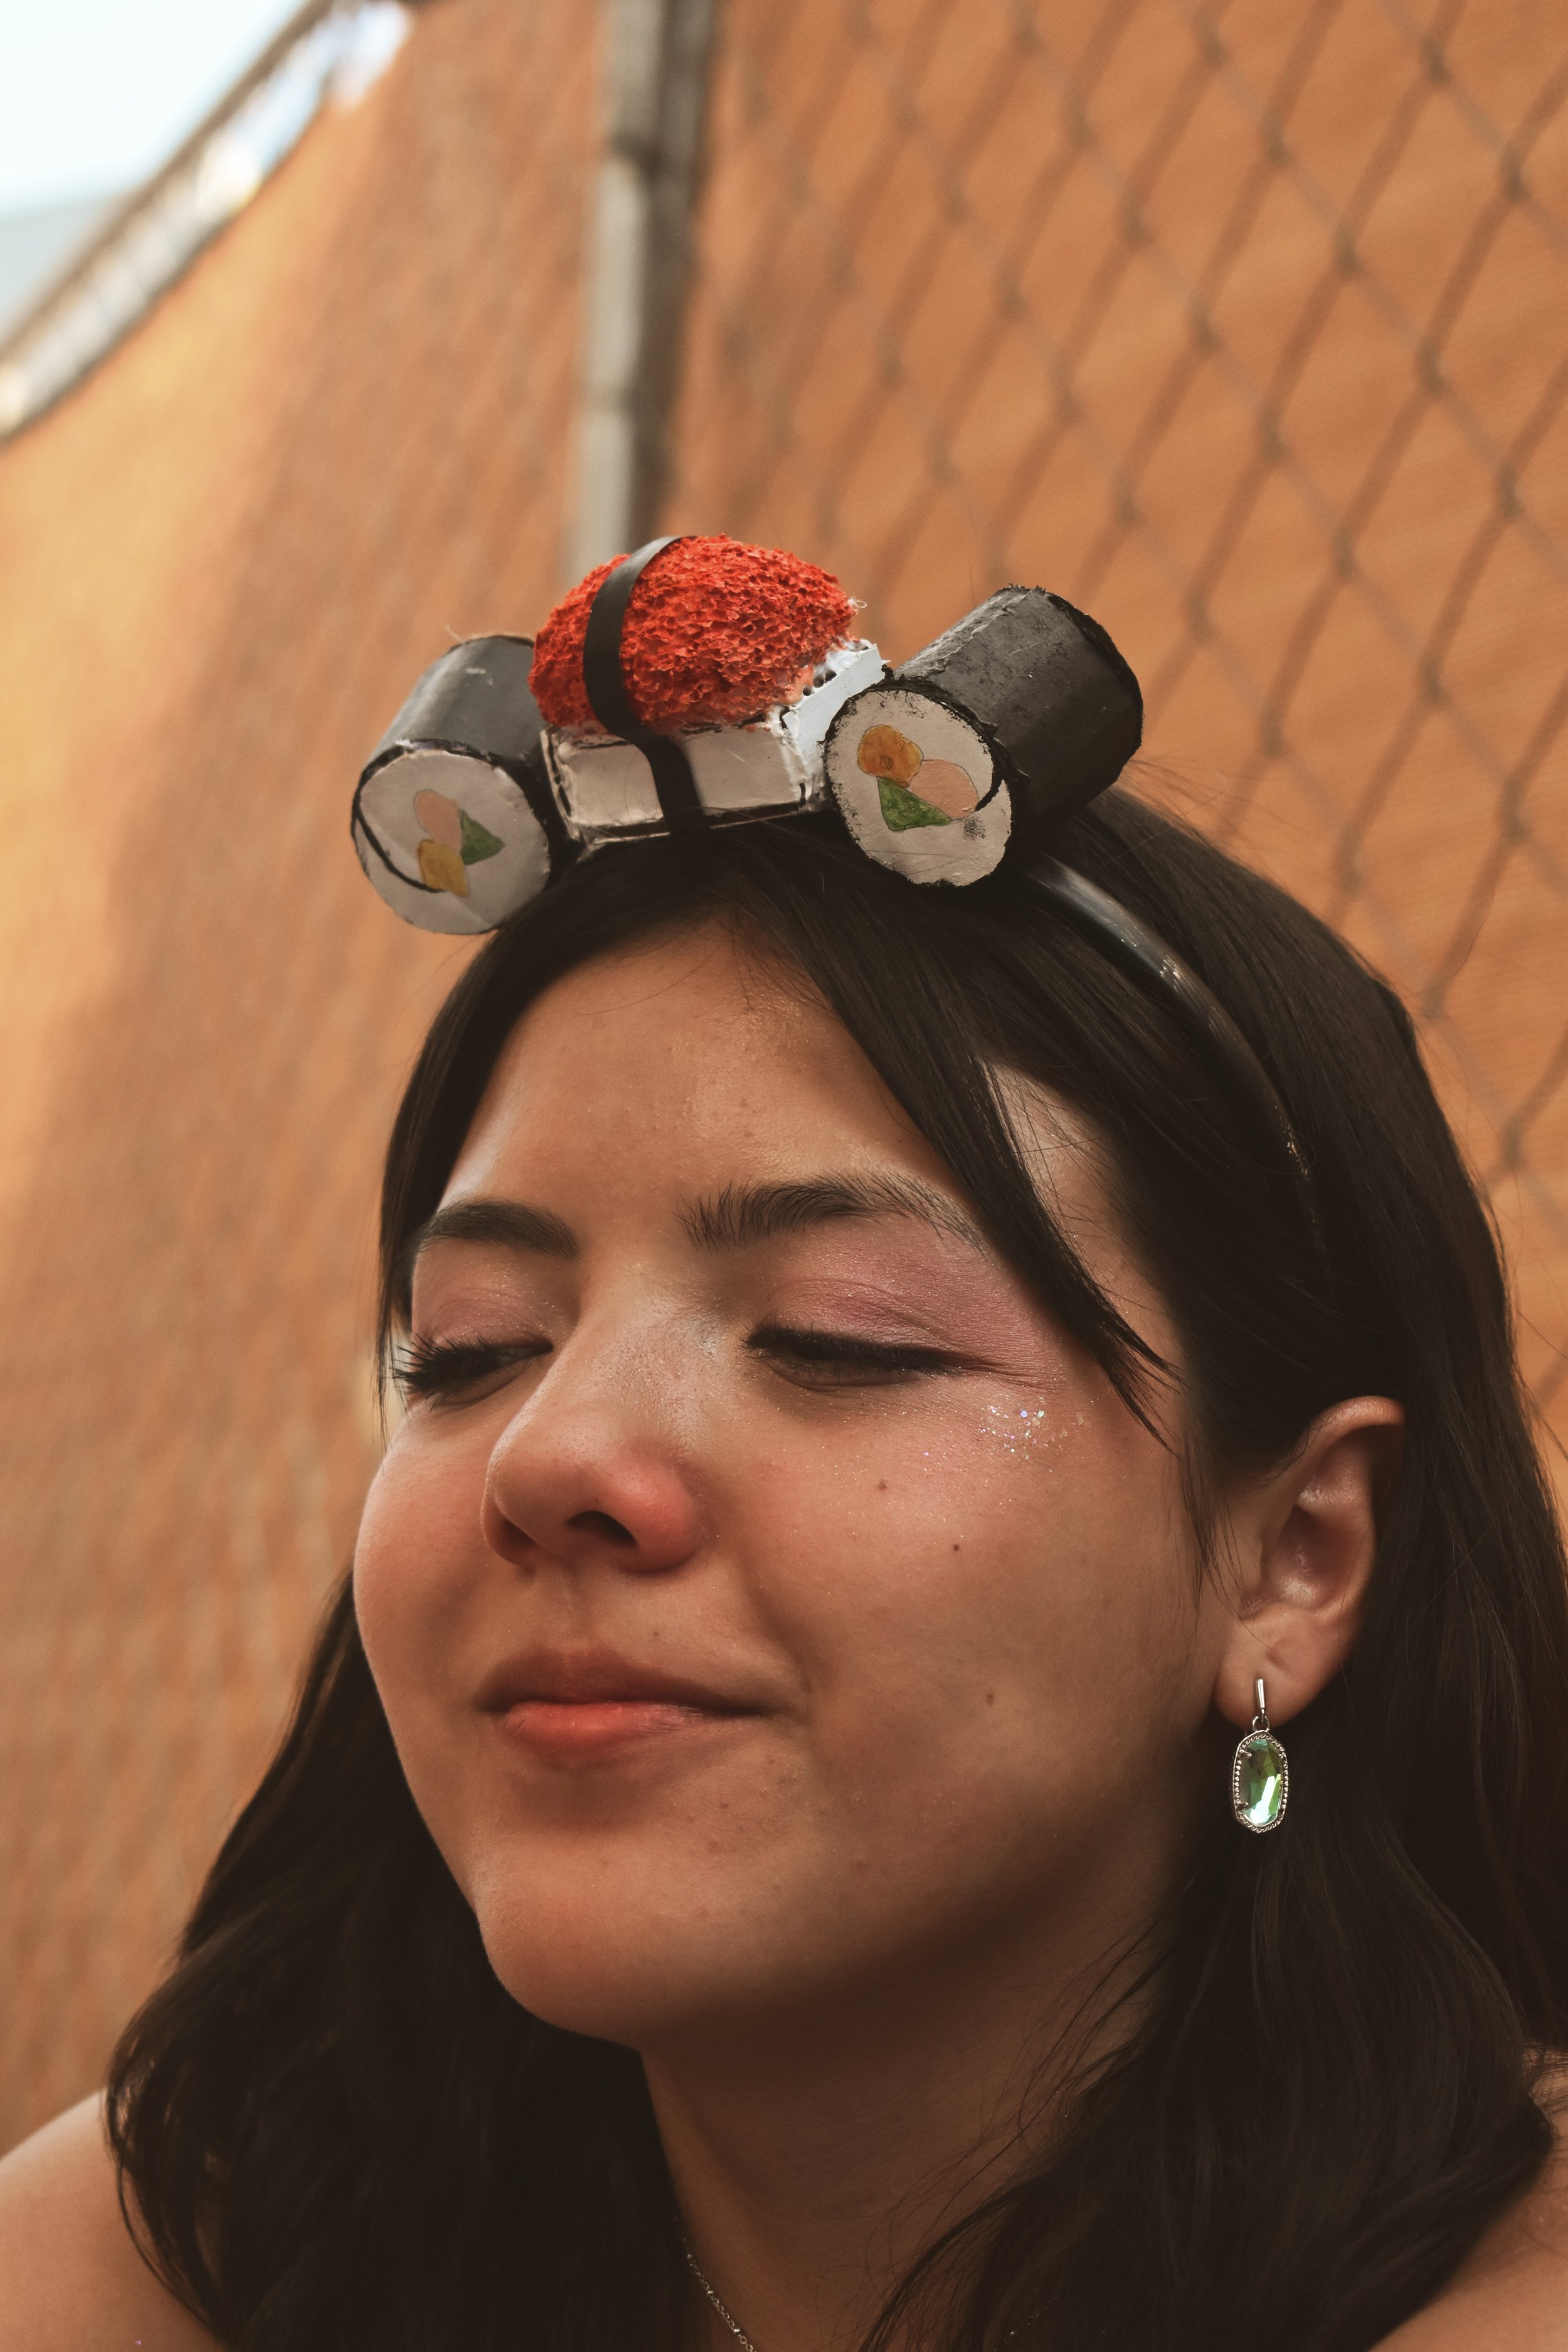  UT freshman Priscilla made a sushi themed headband out of cardboard the night before the show to mimic Styles’s song “Music For A Sushi Restaurant.” “This is my first concert ever … it’s kinda crazy, we’re literally so close to him,” she said. 